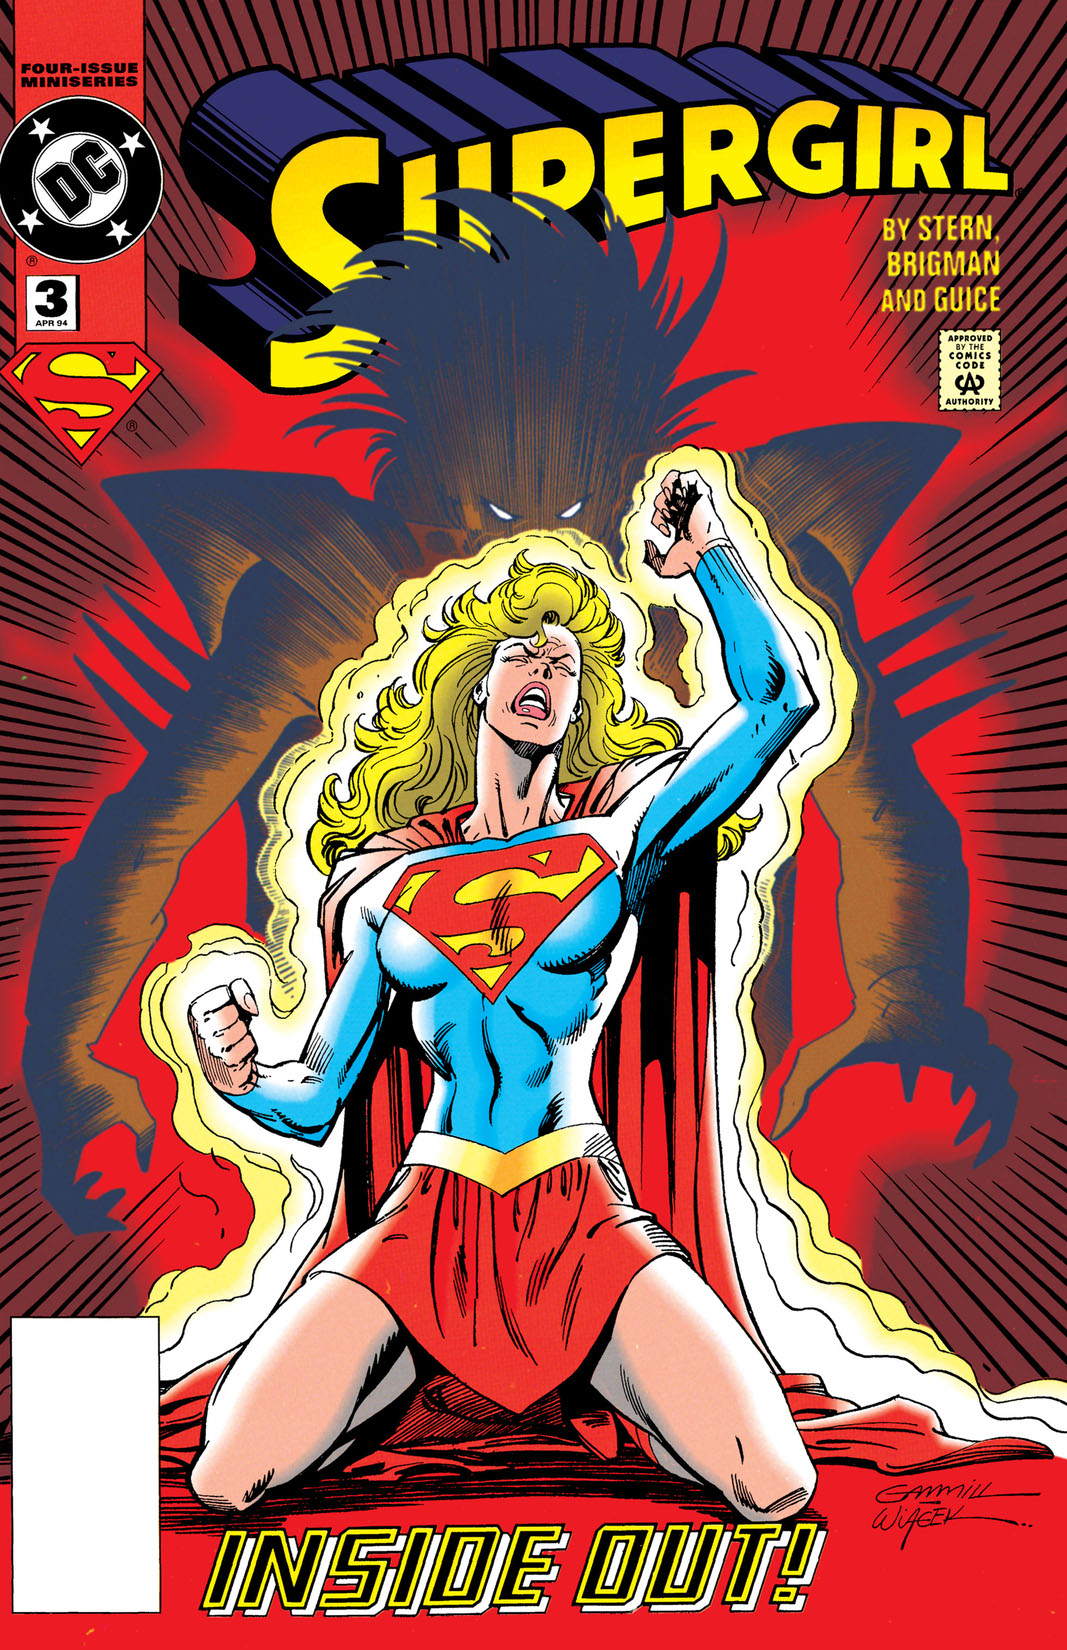 Supergirl (1993-) #3 preview images